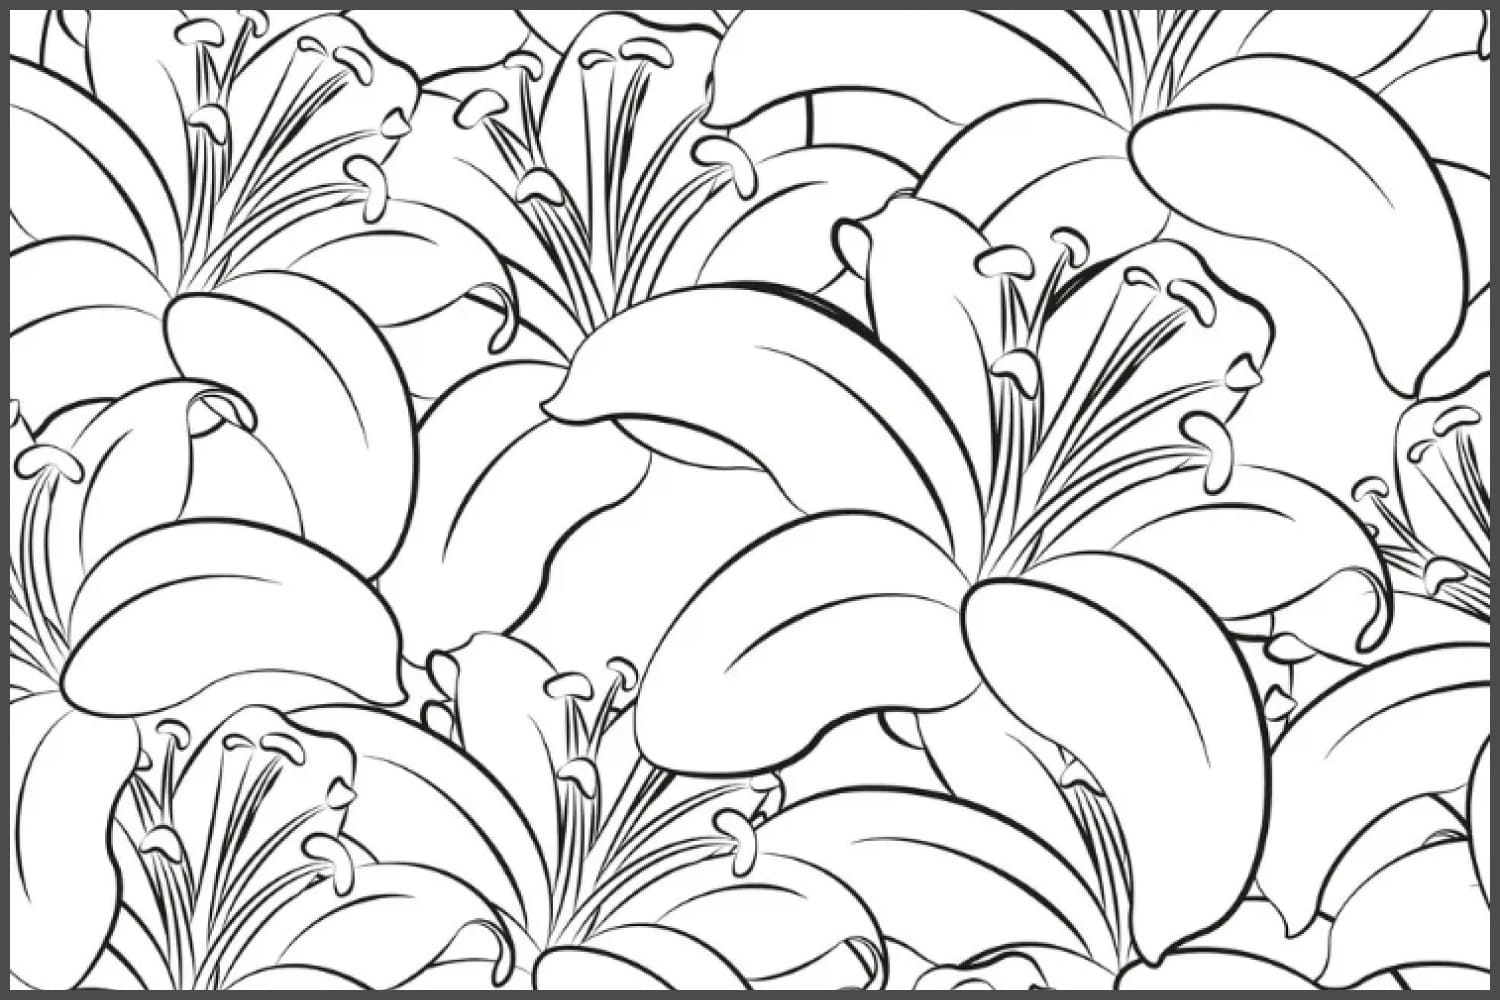 Large flowers drawn with black lines.